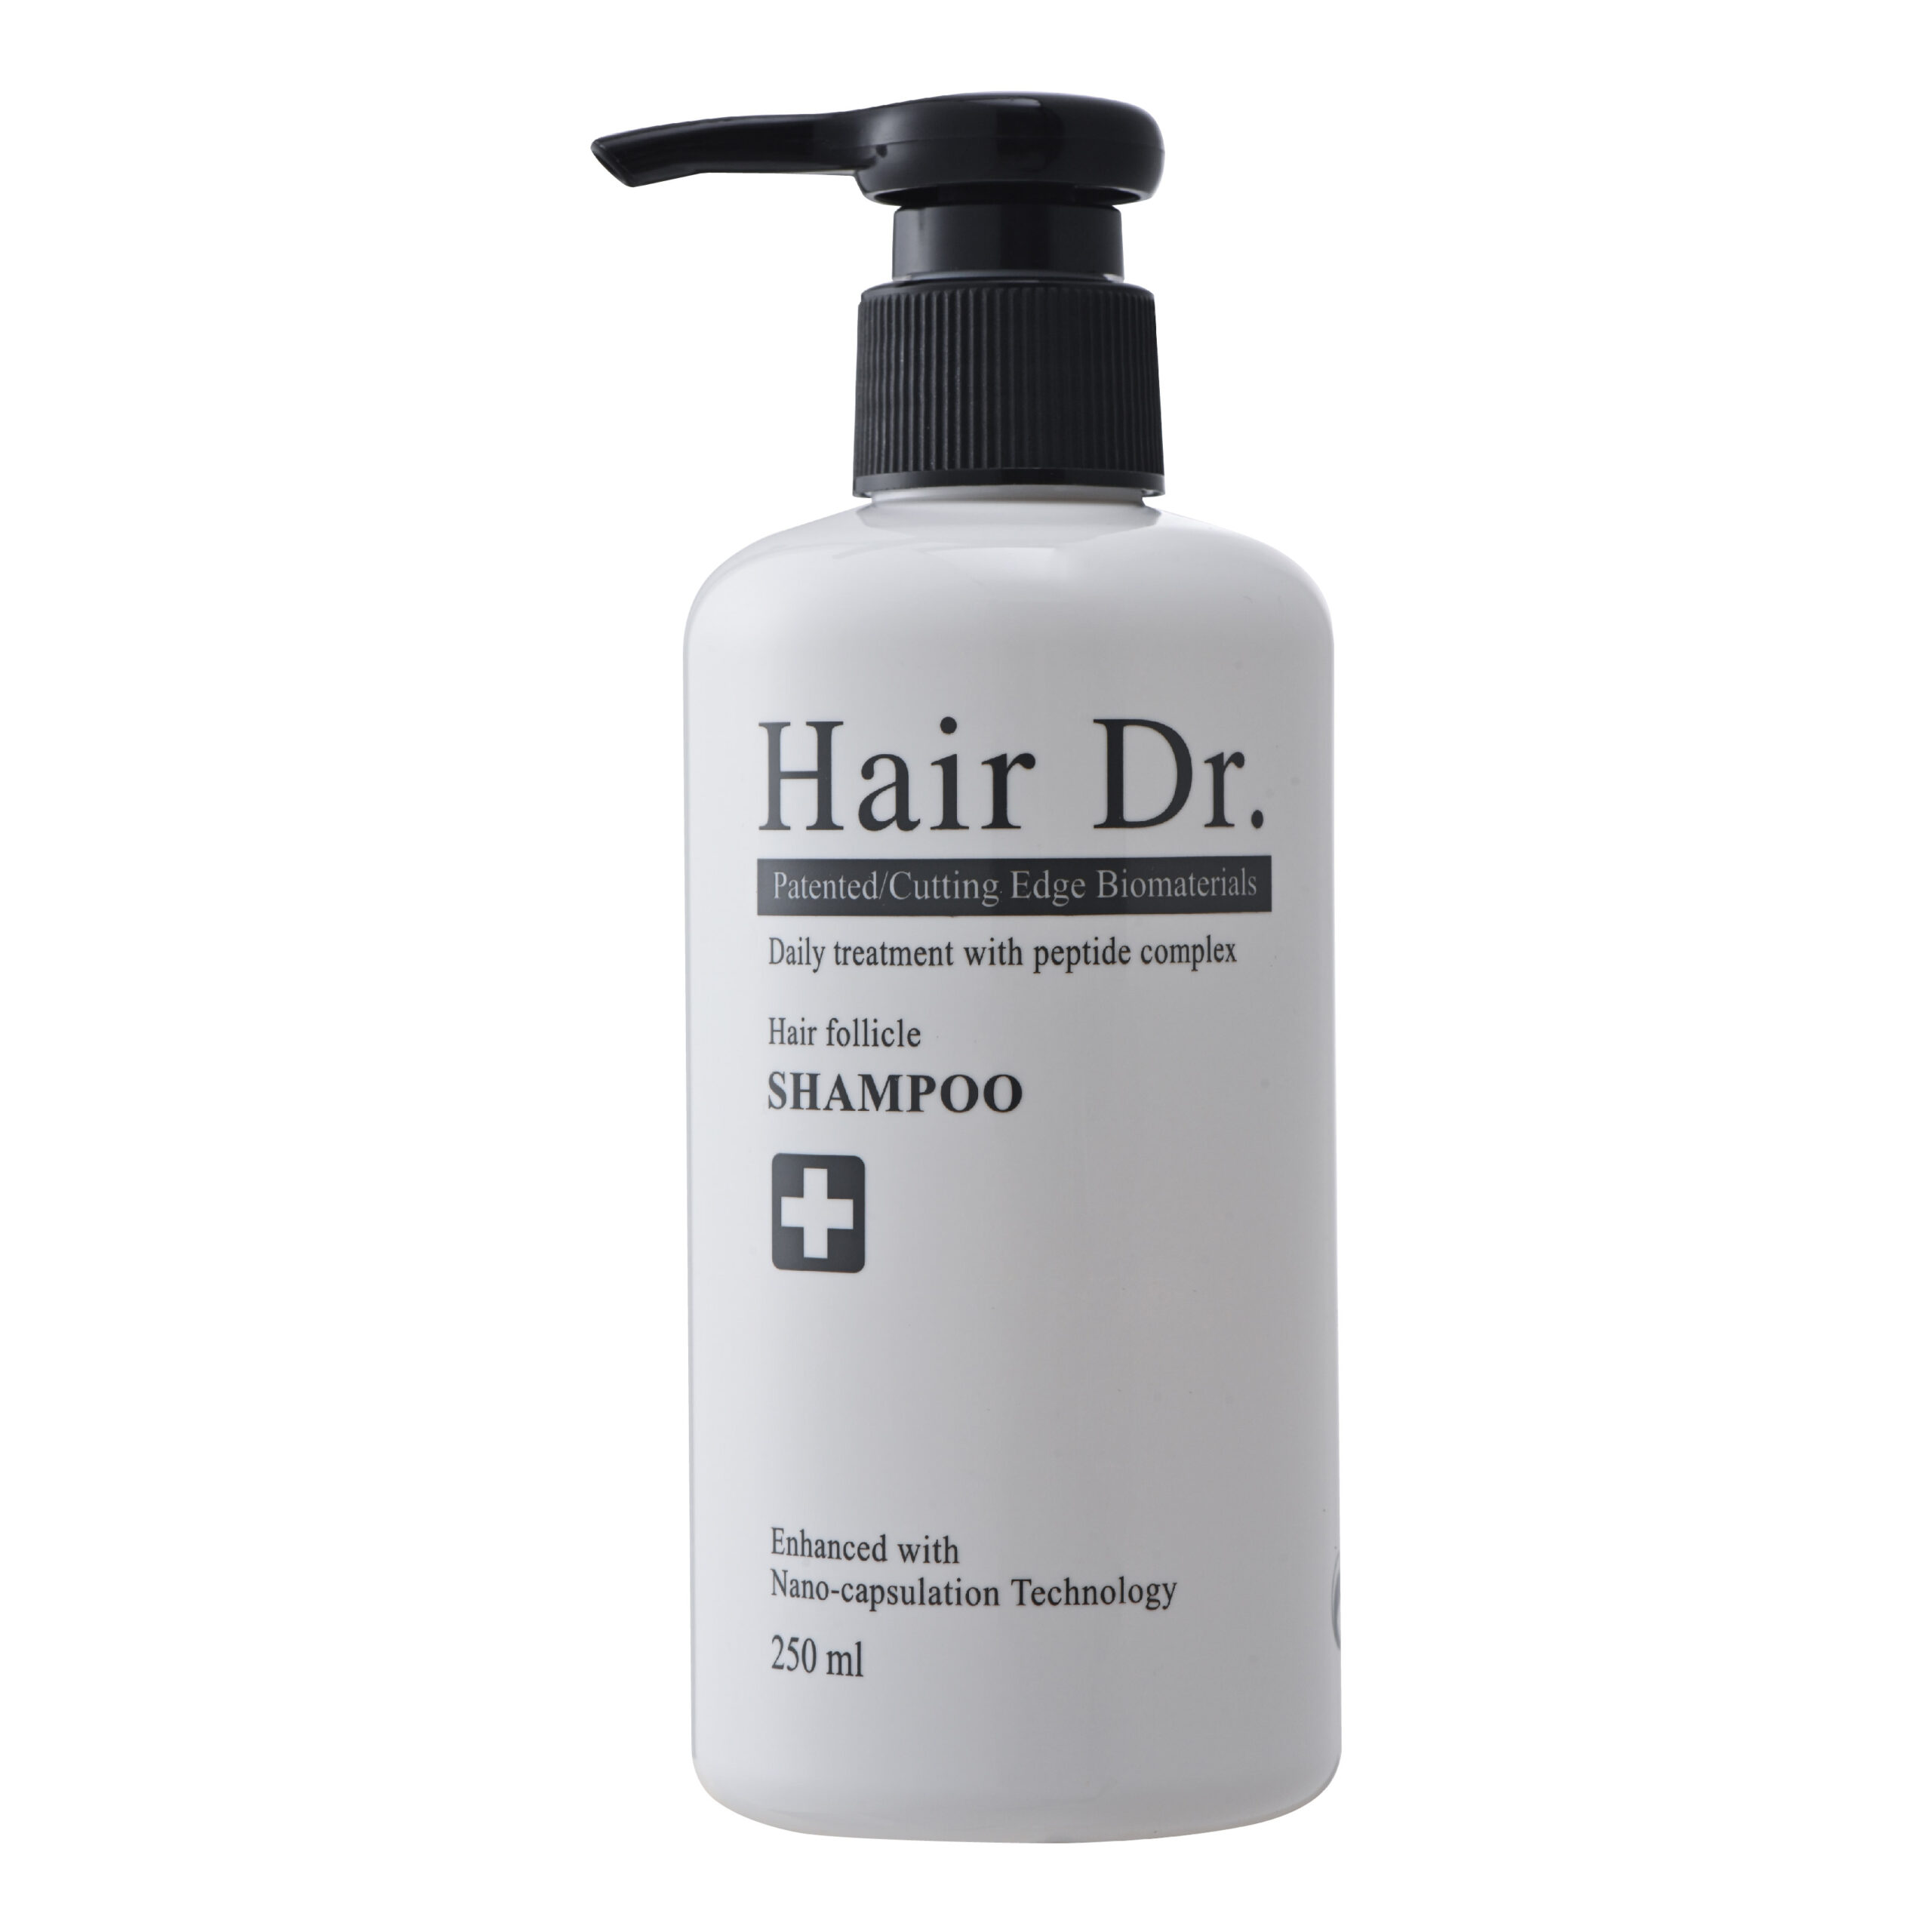 Featured image for “HAIR DR. FOLLICLE SHAMPOO”